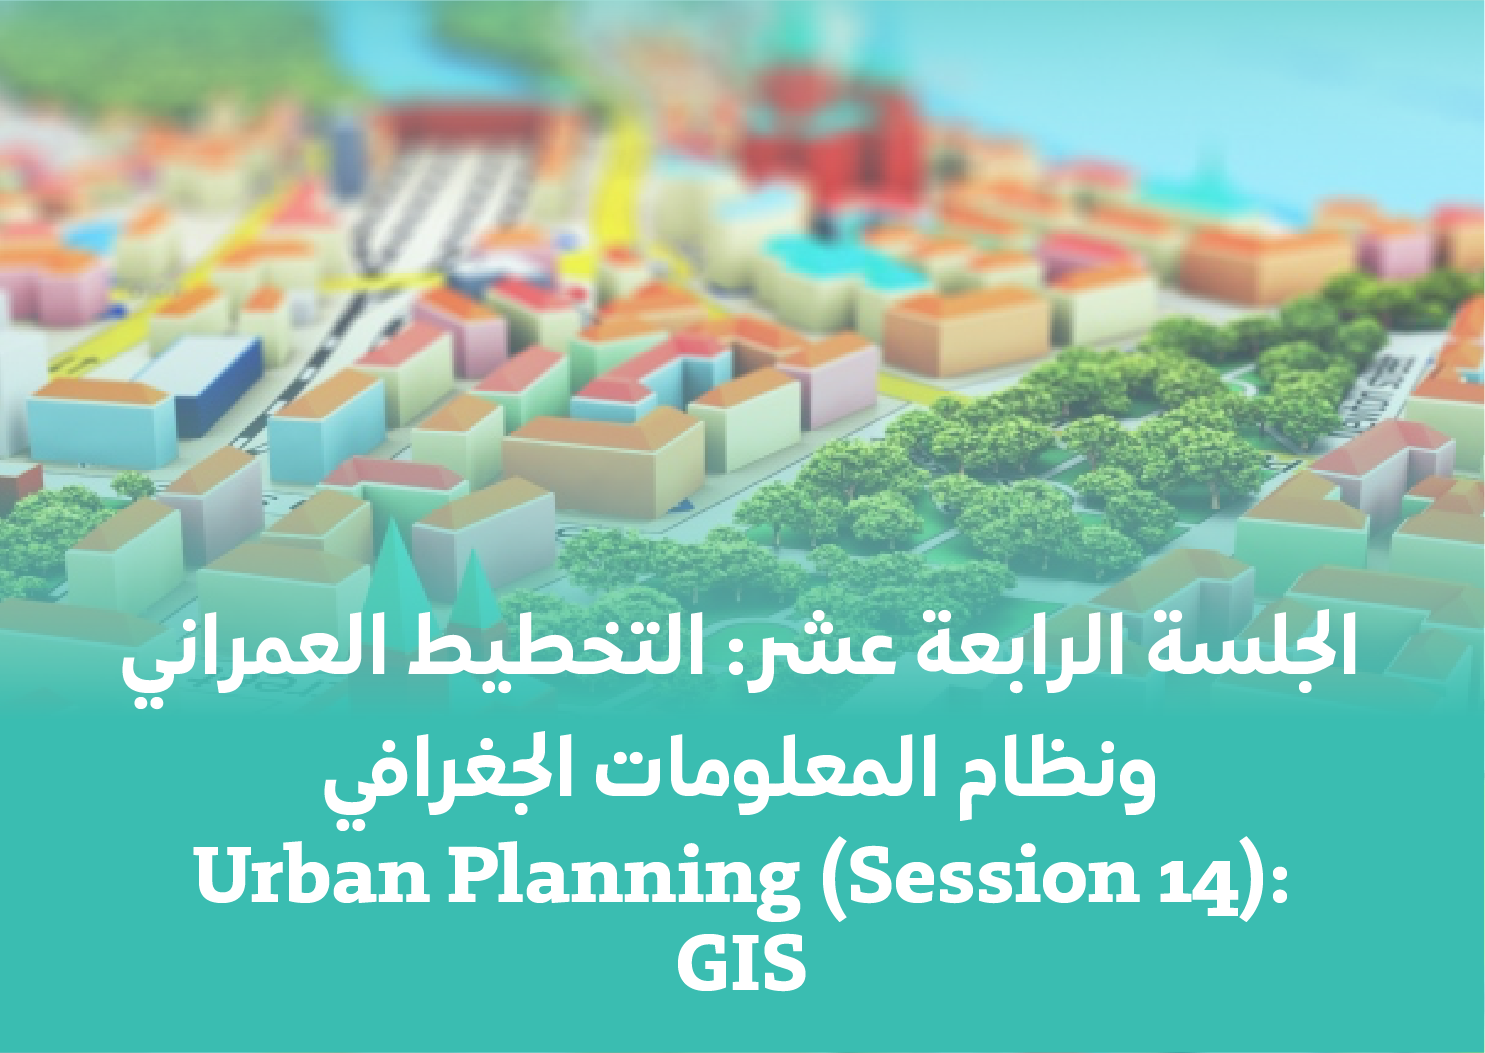 Session 14: Urban Planning and GIS